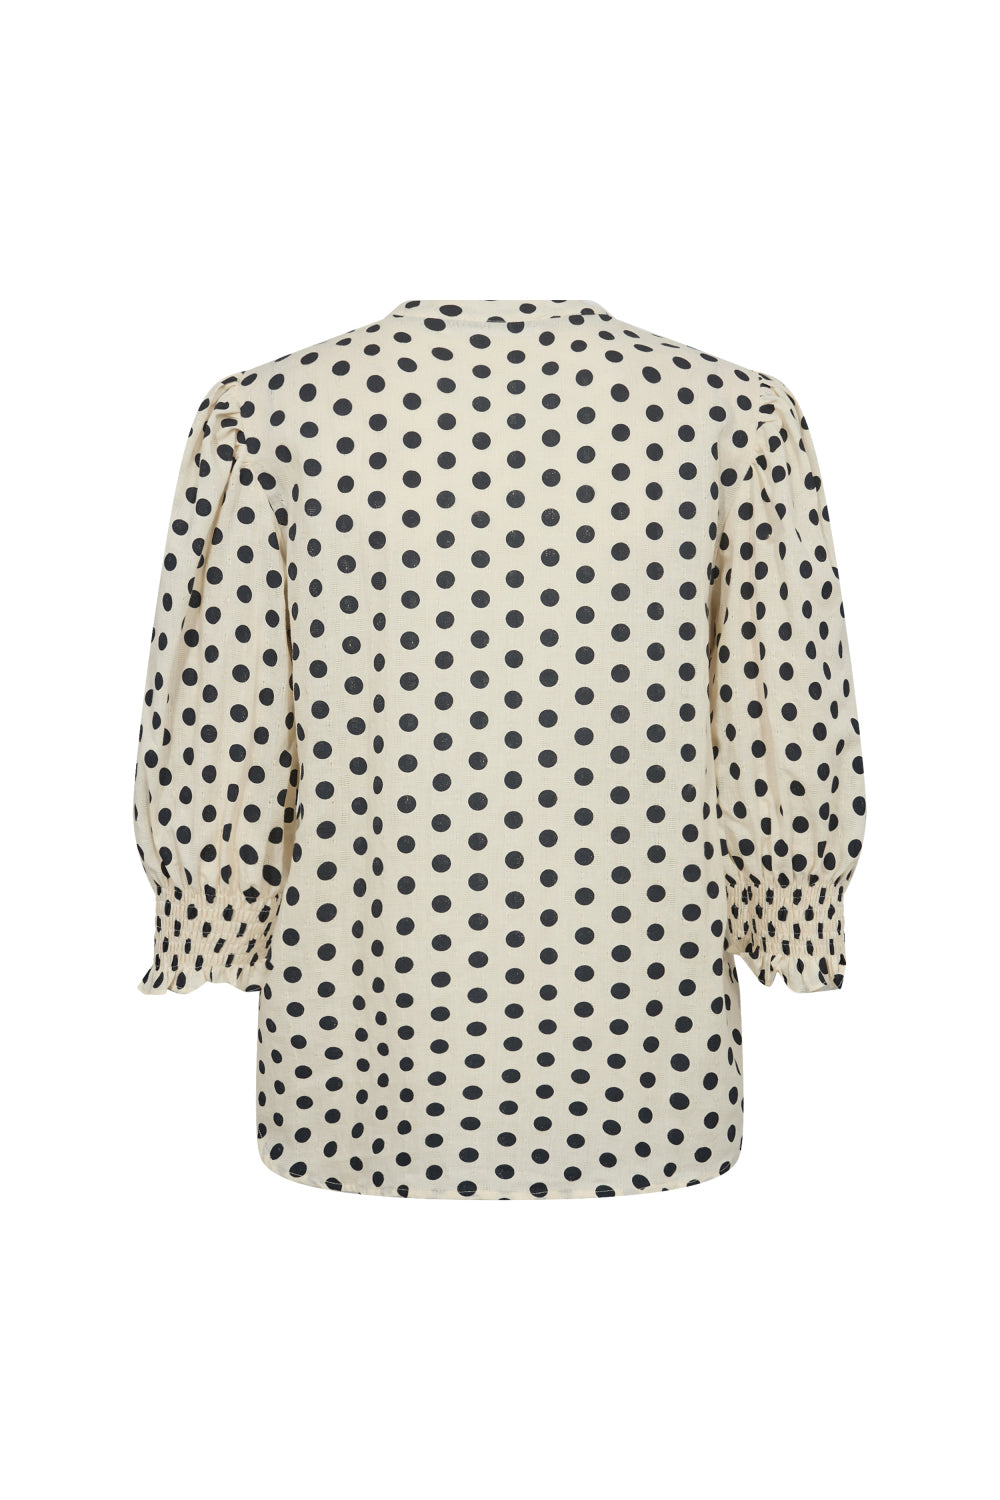 Co'Couture Davi Dot SS Blouse - Off White / Navy - RUM Amsterdam